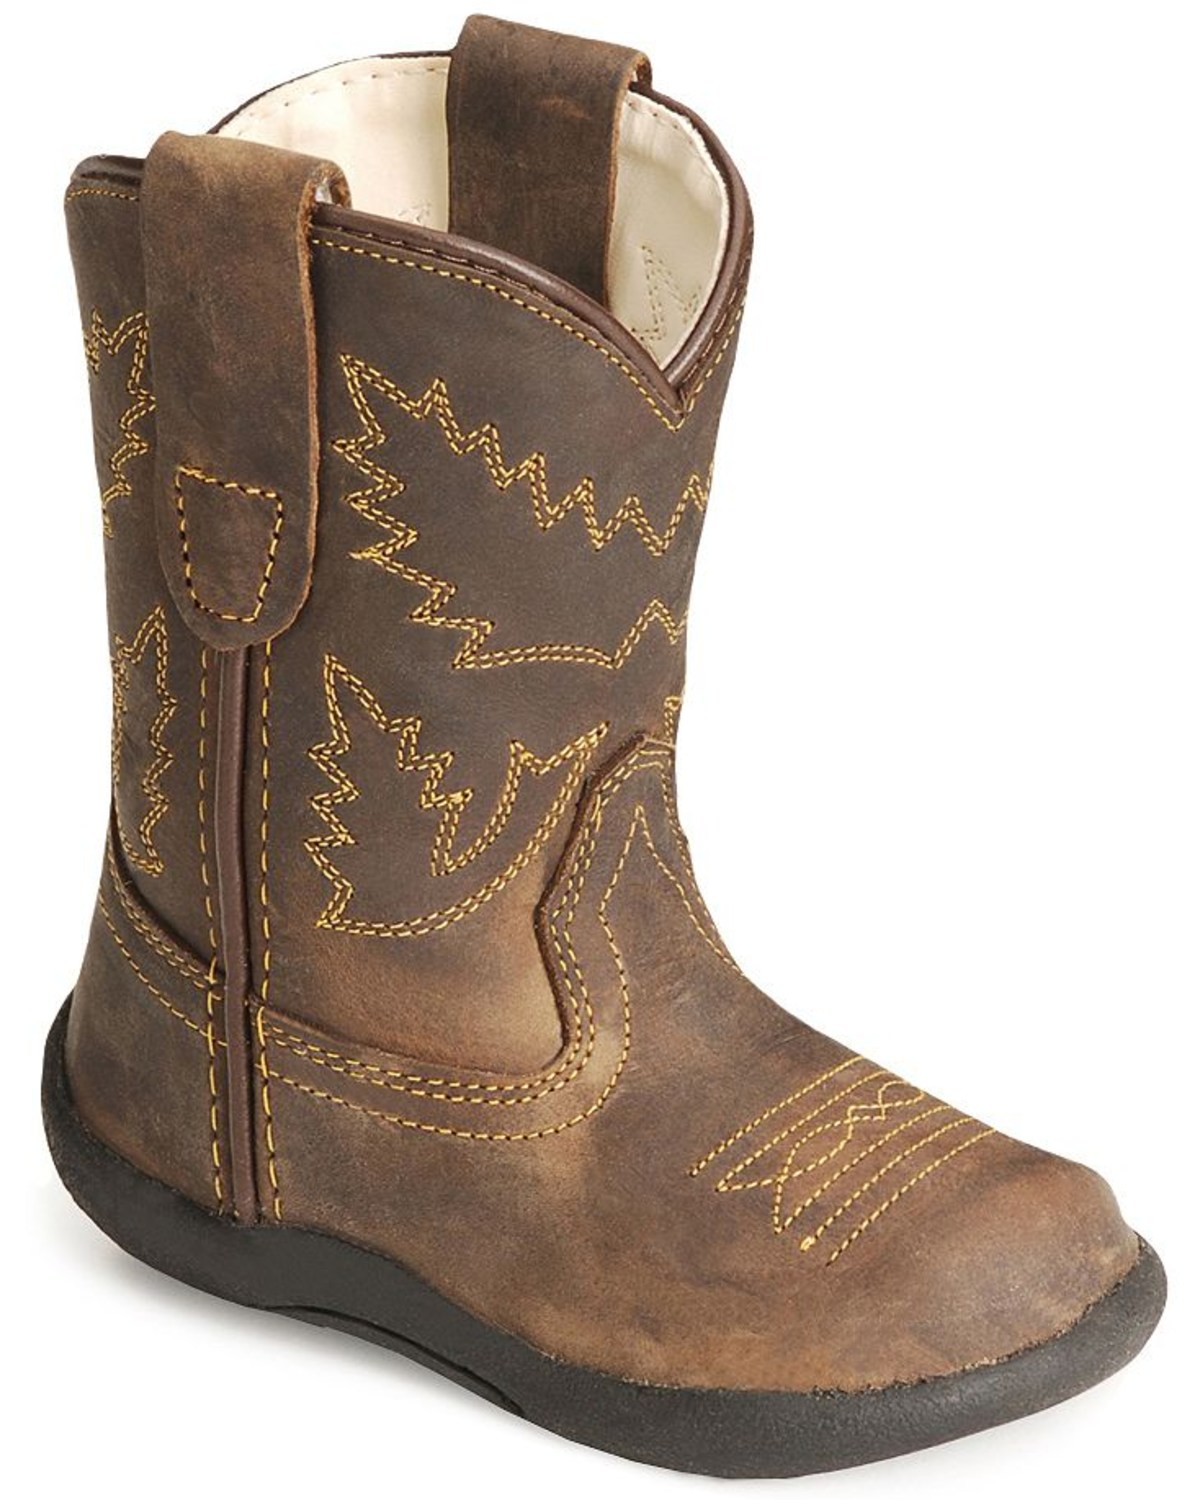 Old West Toddler Boys' Crazy Horse Boots - Round Toe